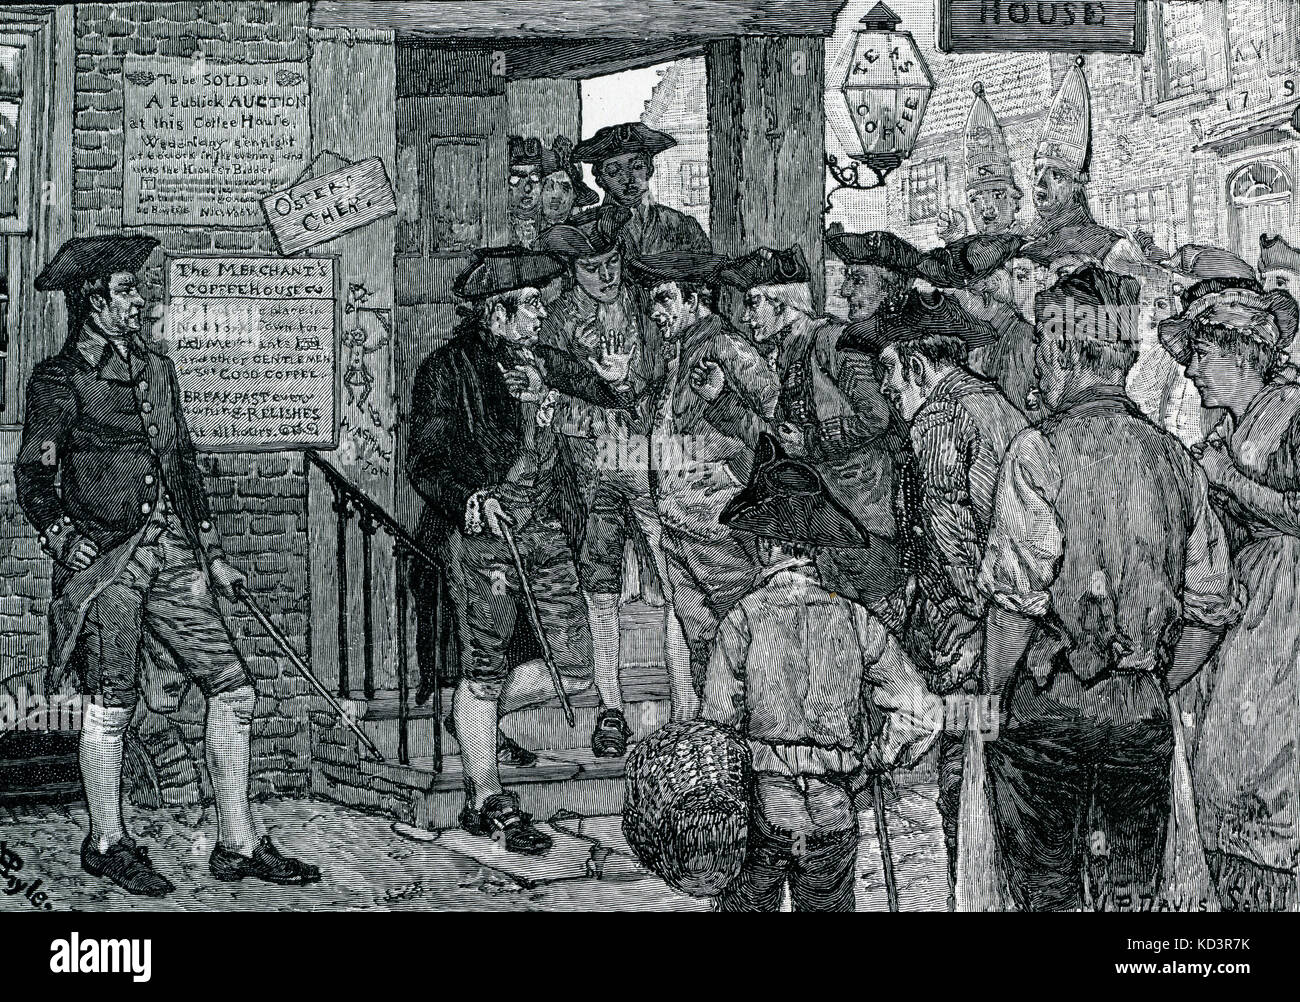 Mob attempting to force a stamp officer to resign, Boston, protesting the Stamp Act of 1765, American Revolution. Illustration by Howard Pyle, 1908 Stock Photo